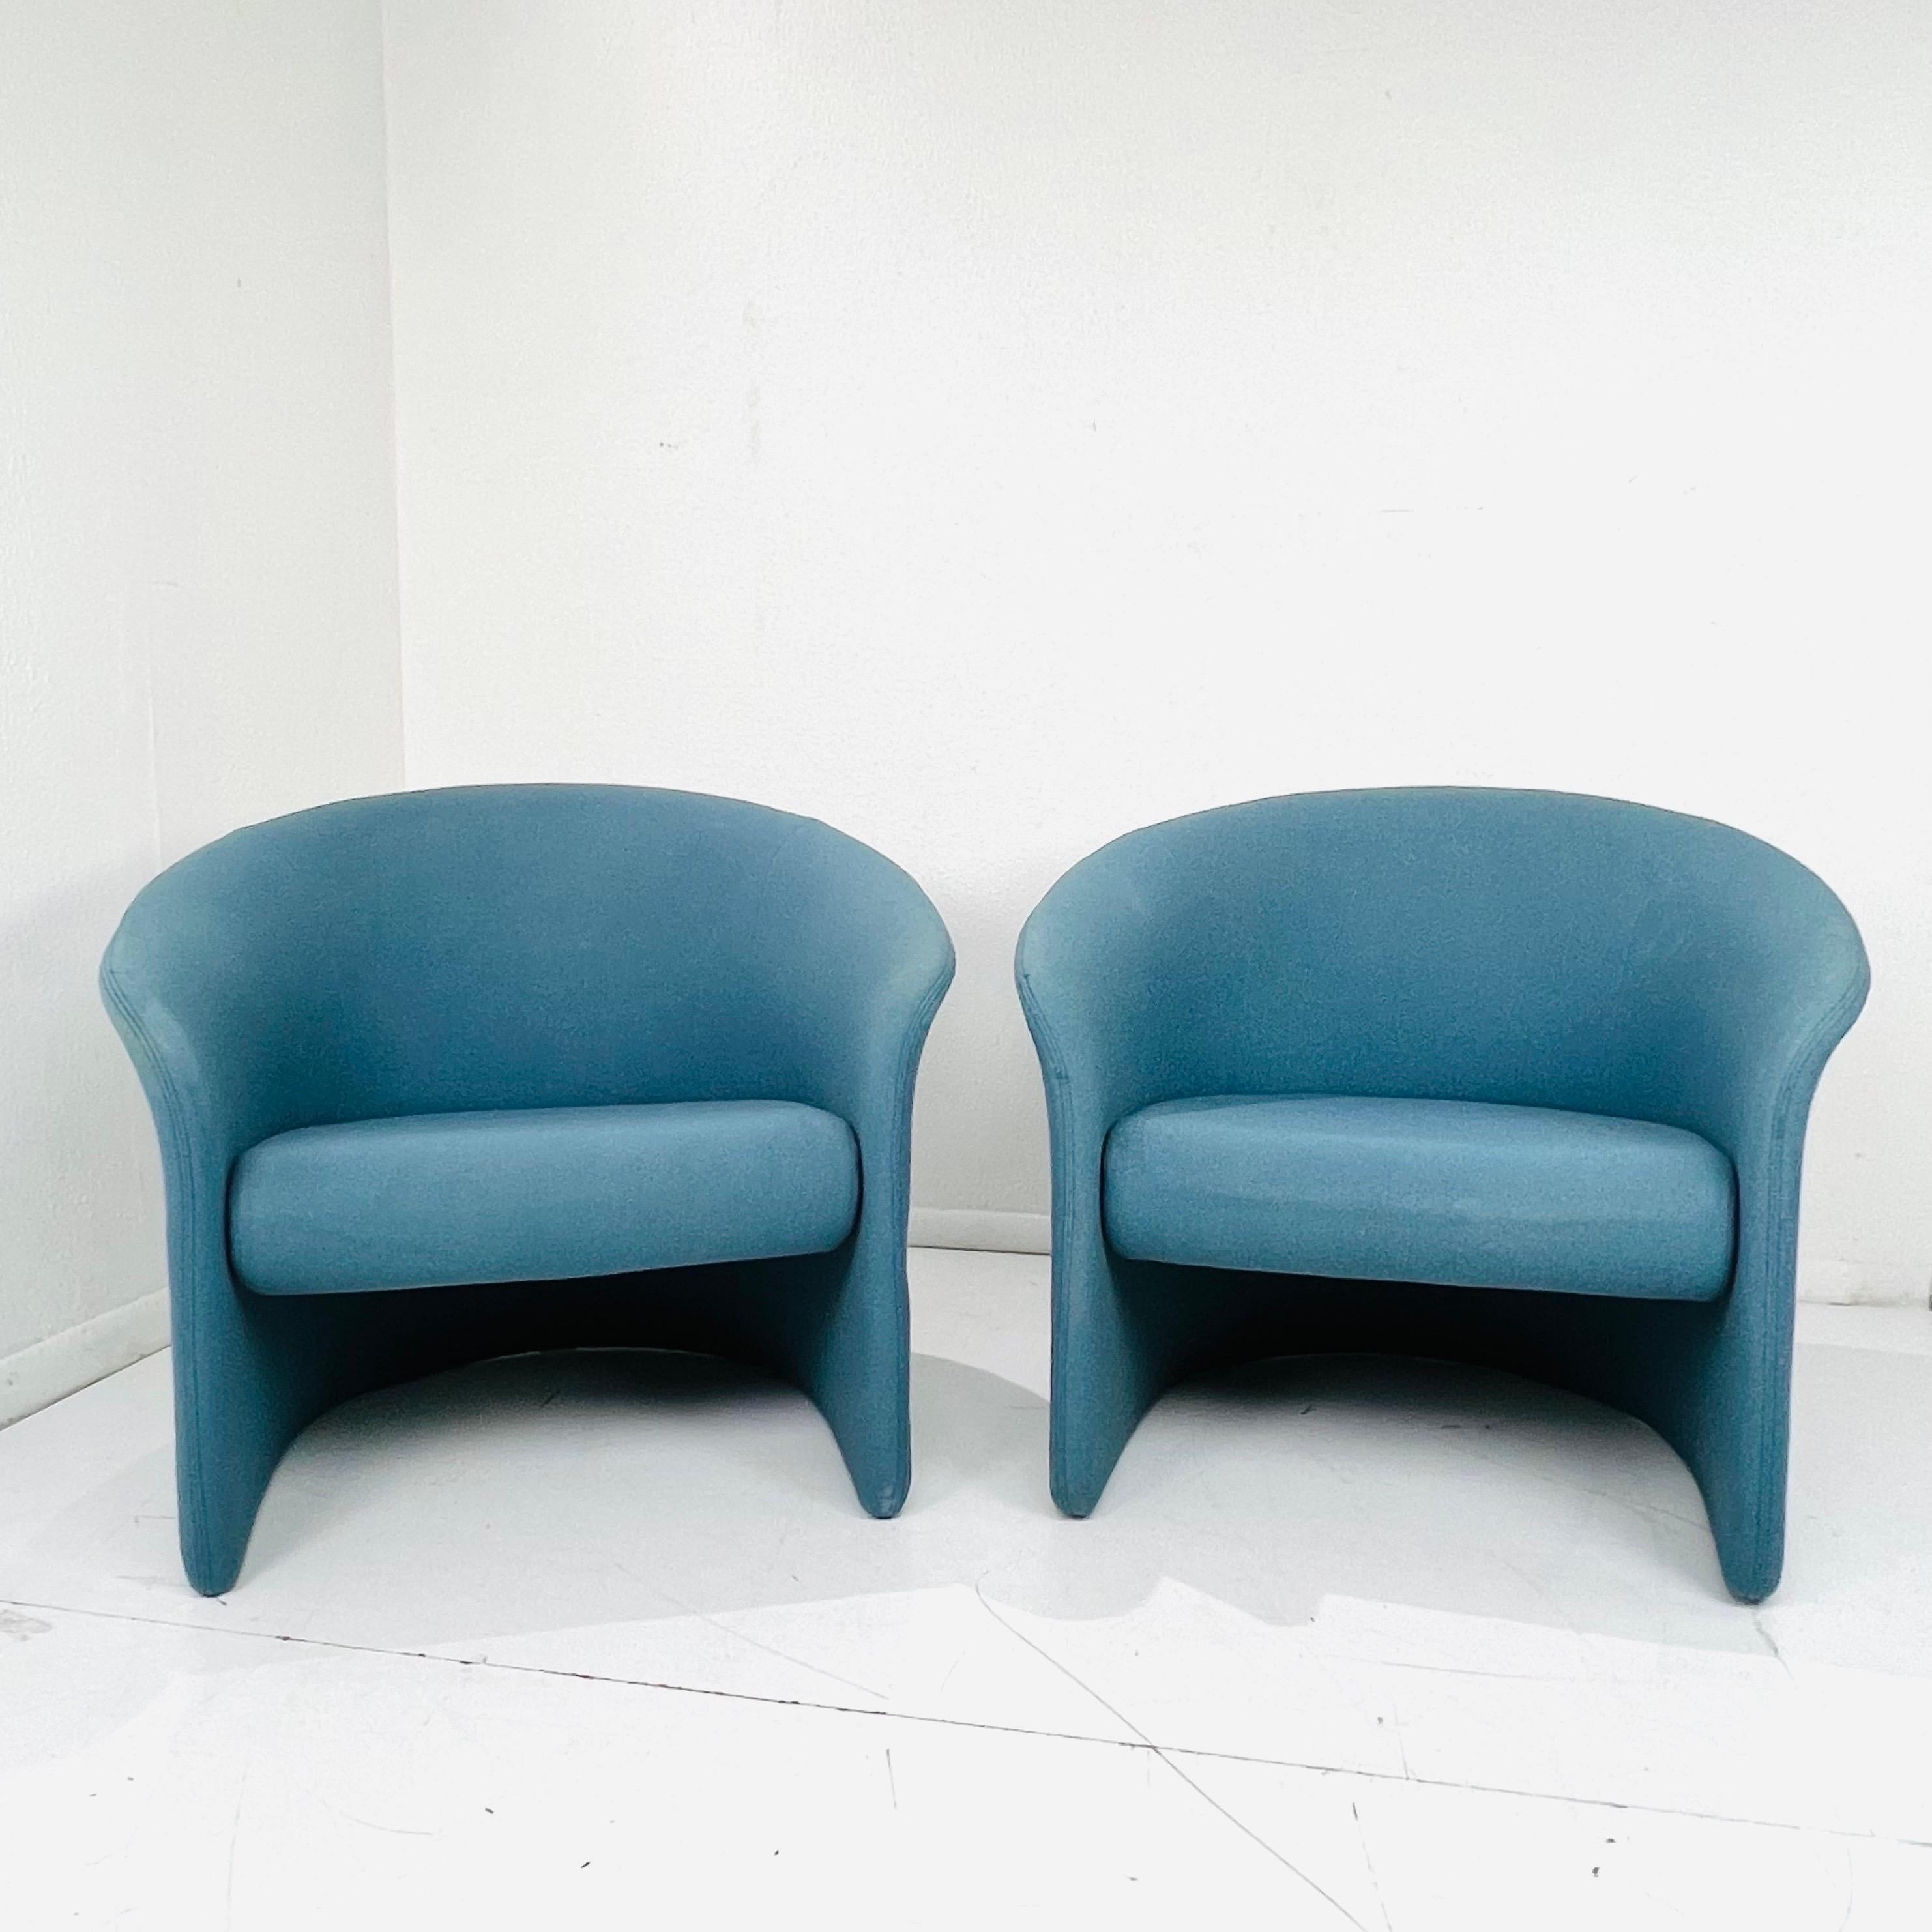 Pair of Postmodern Tub Chairs by Massimo Vignelli For Sale 9